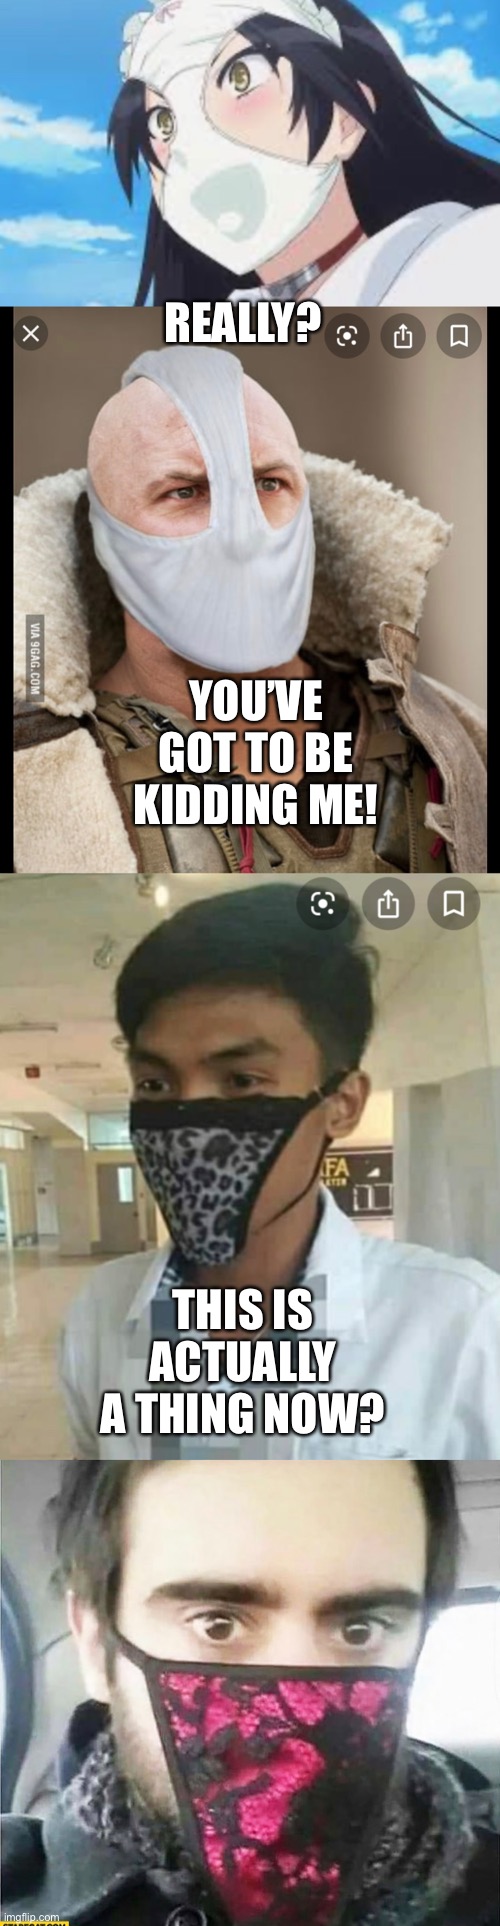 Panty masks? You must be joking! | REALLY? YOU’VE GOT TO BE KIDDING ME! THIS IS ACTUALLY A THING NOW? | image tagged in panty masks,corona virus | made w/ Imgflip meme maker